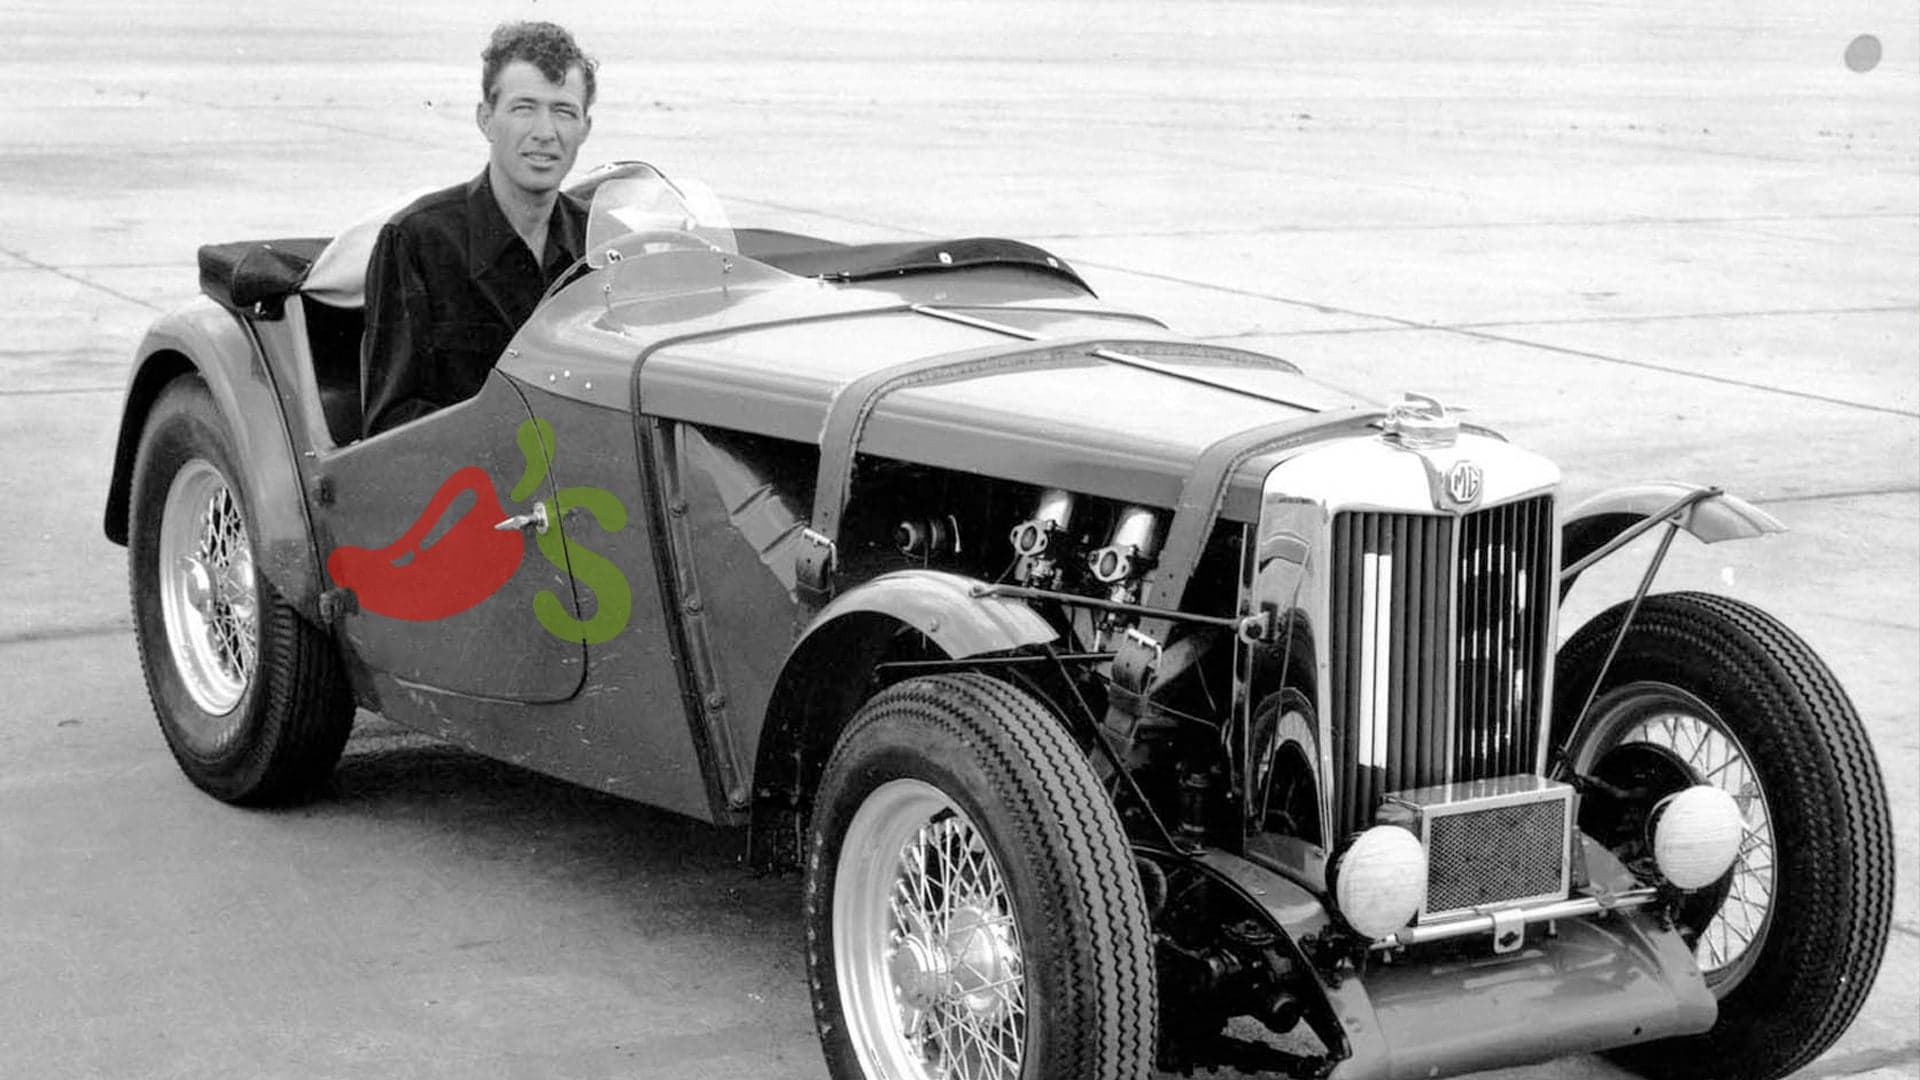 Did You Know Racing Legend Carroll Shelby Helped Found Chili’s?